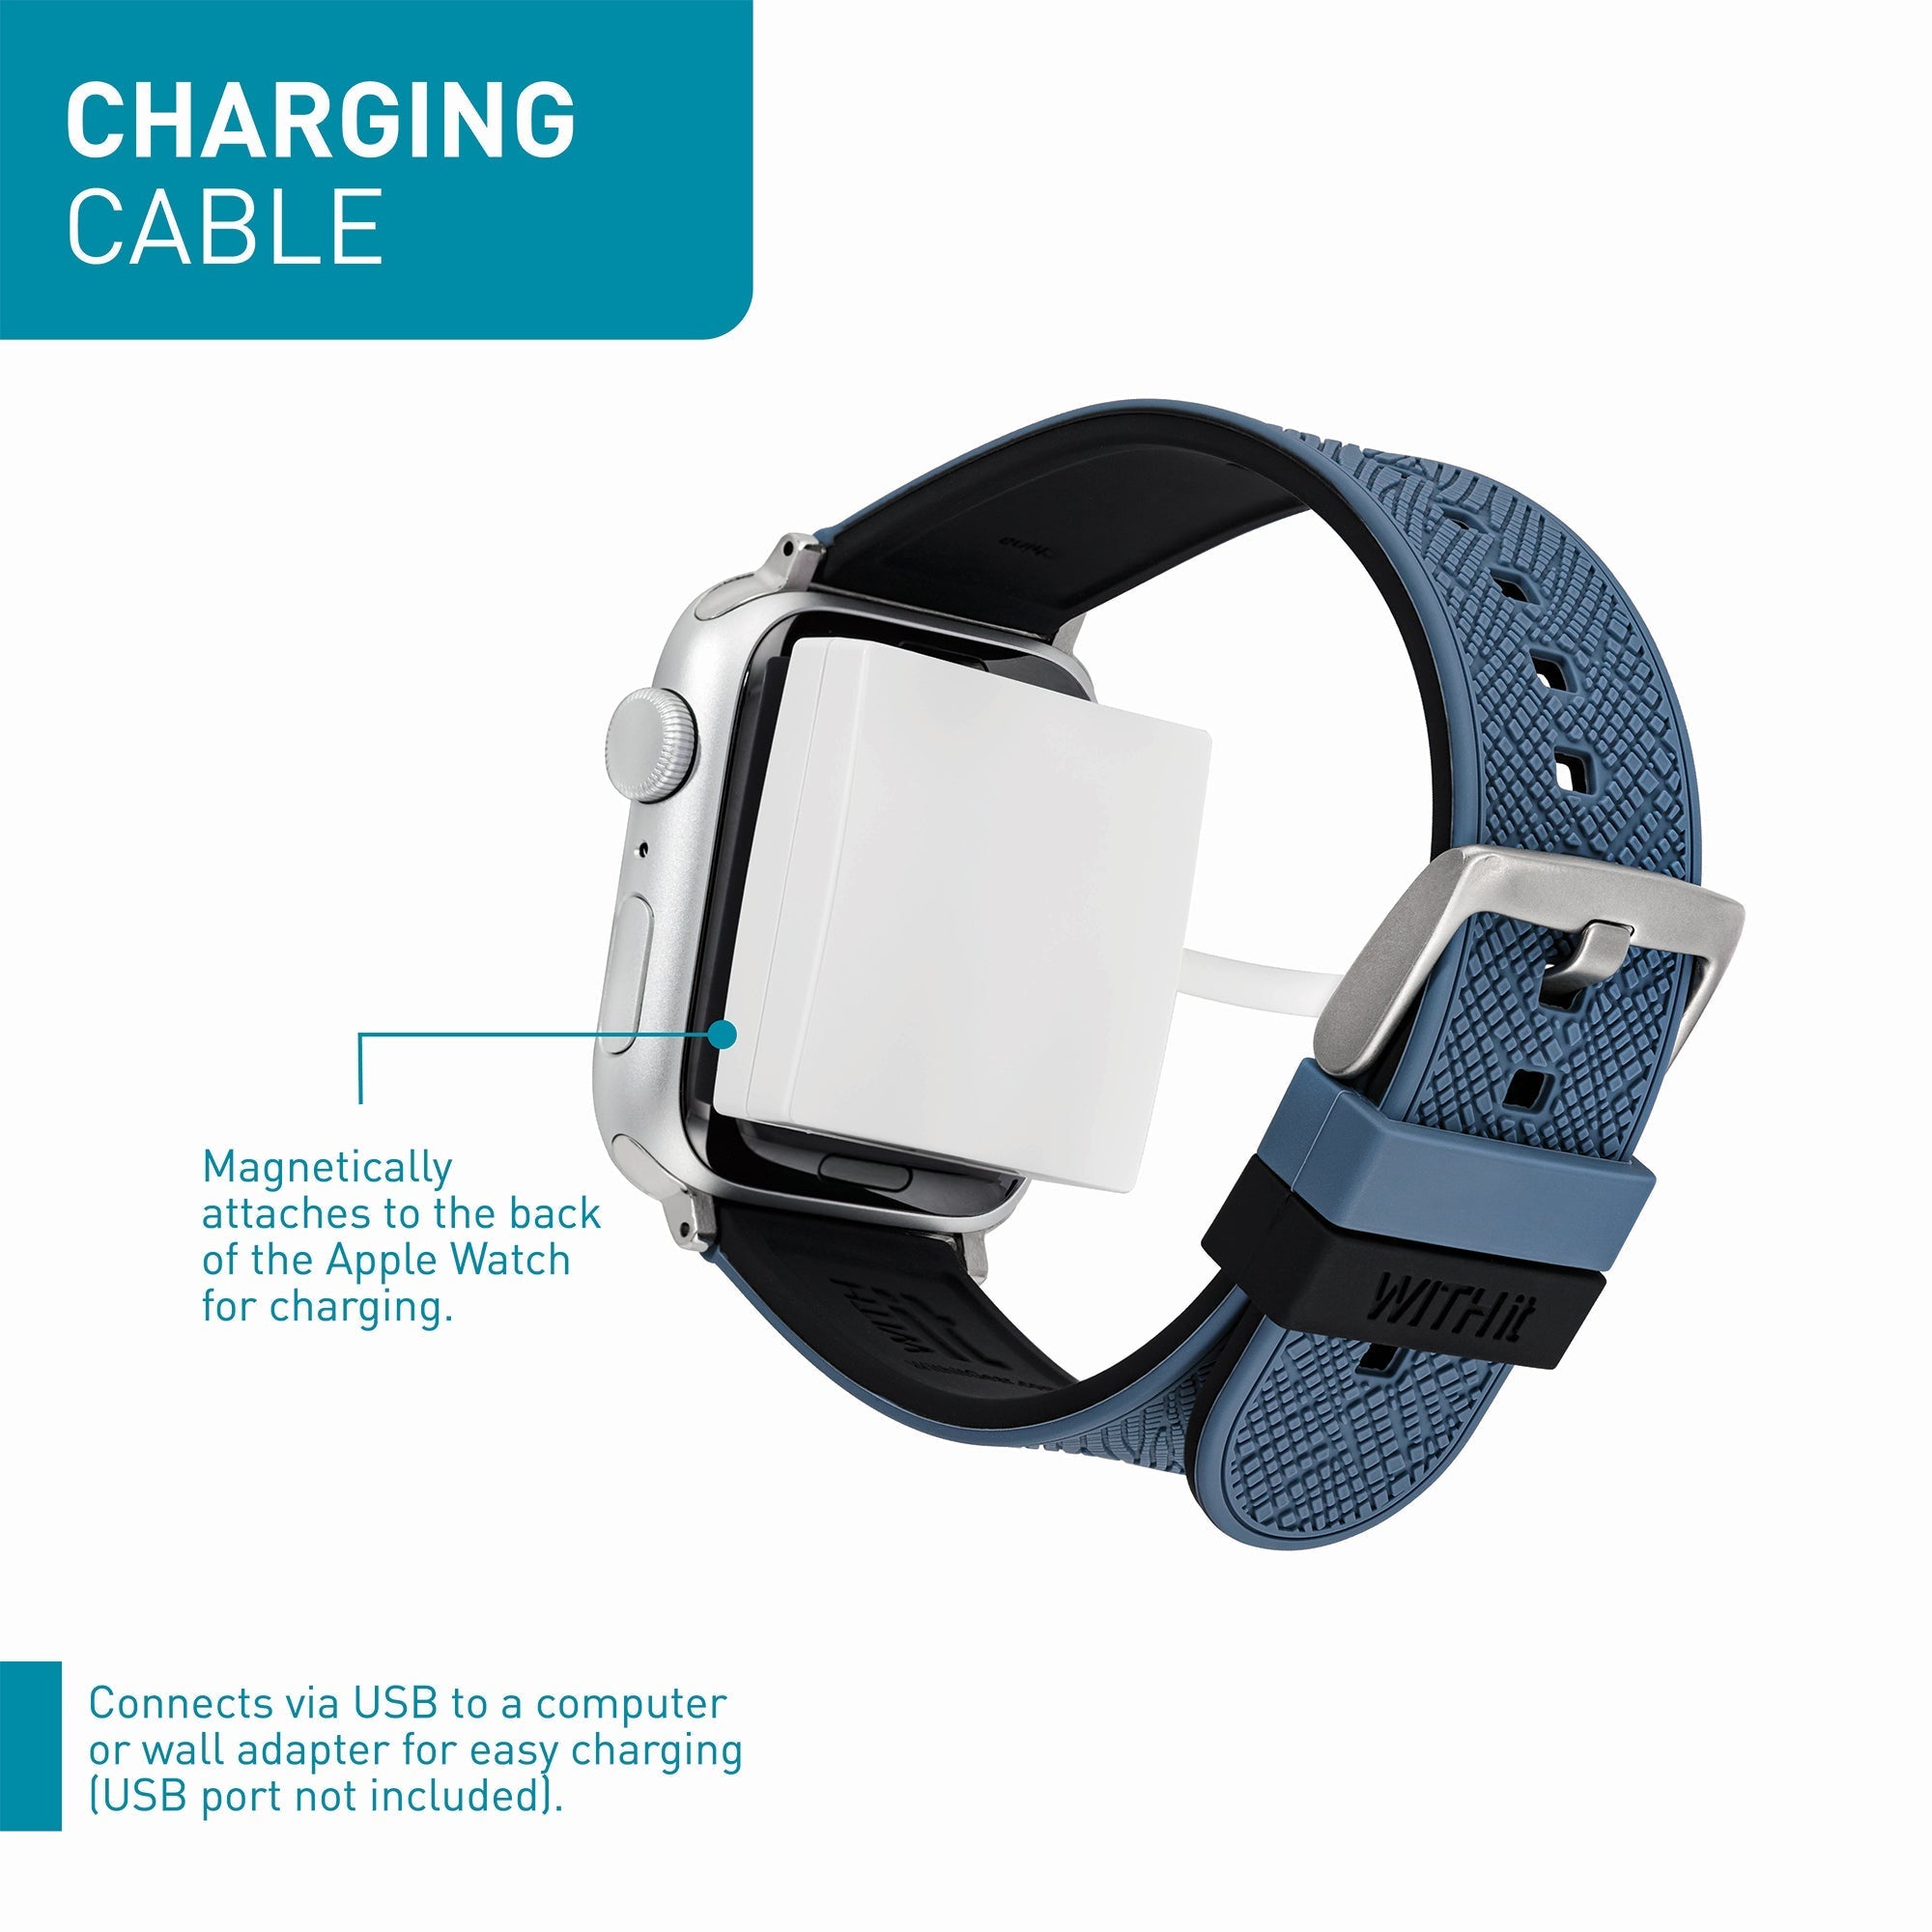 Magnetic Charging Cable for Apple Watch® (3 feet)